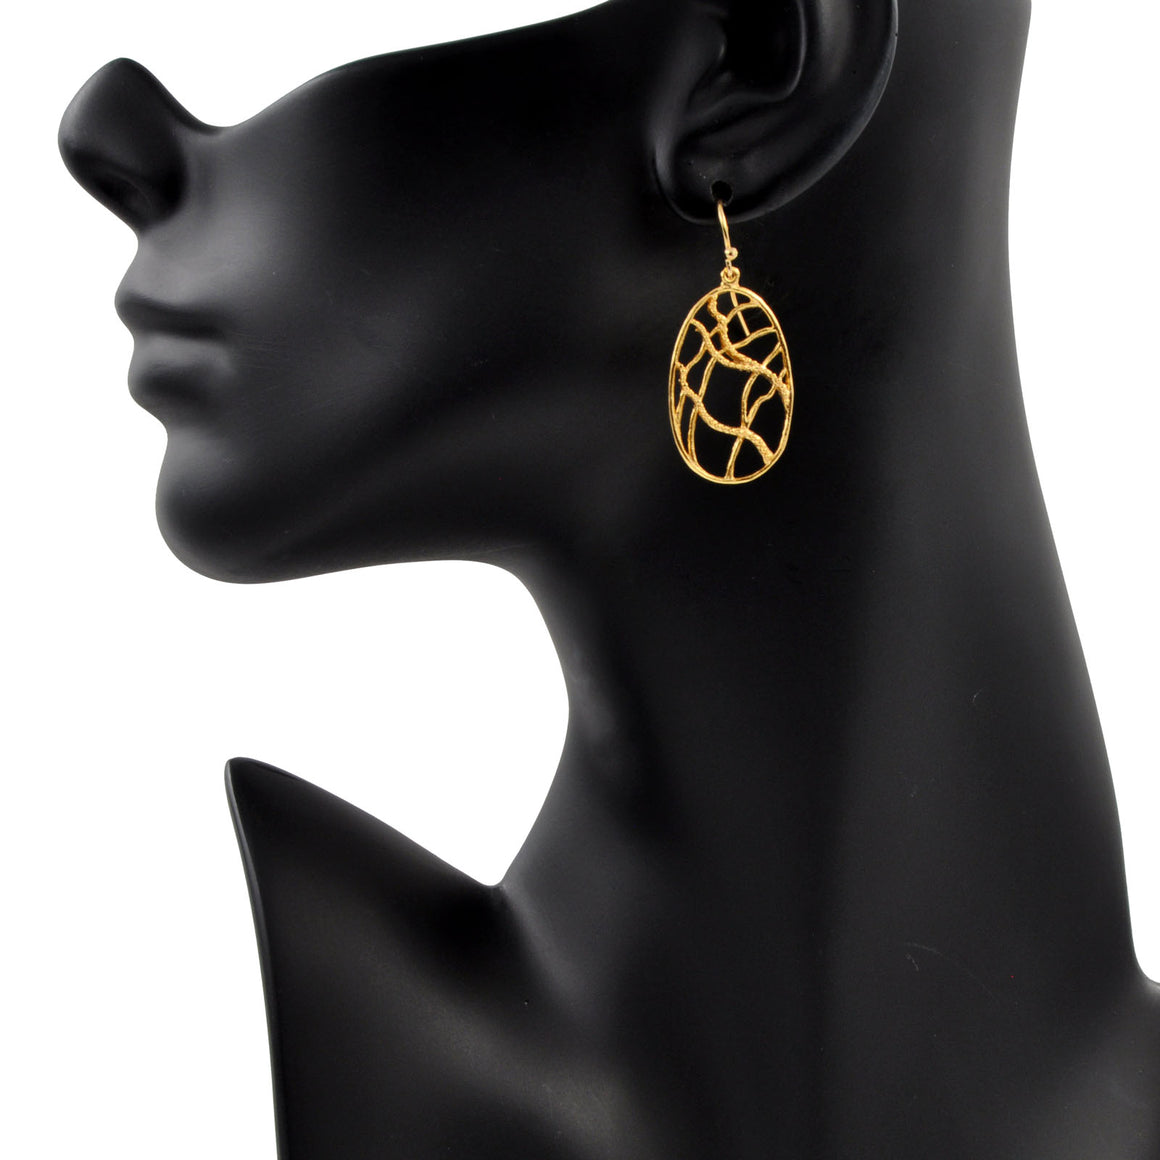 Intricate Branches Oval Earrings (Petite) - 24K Gold Plated